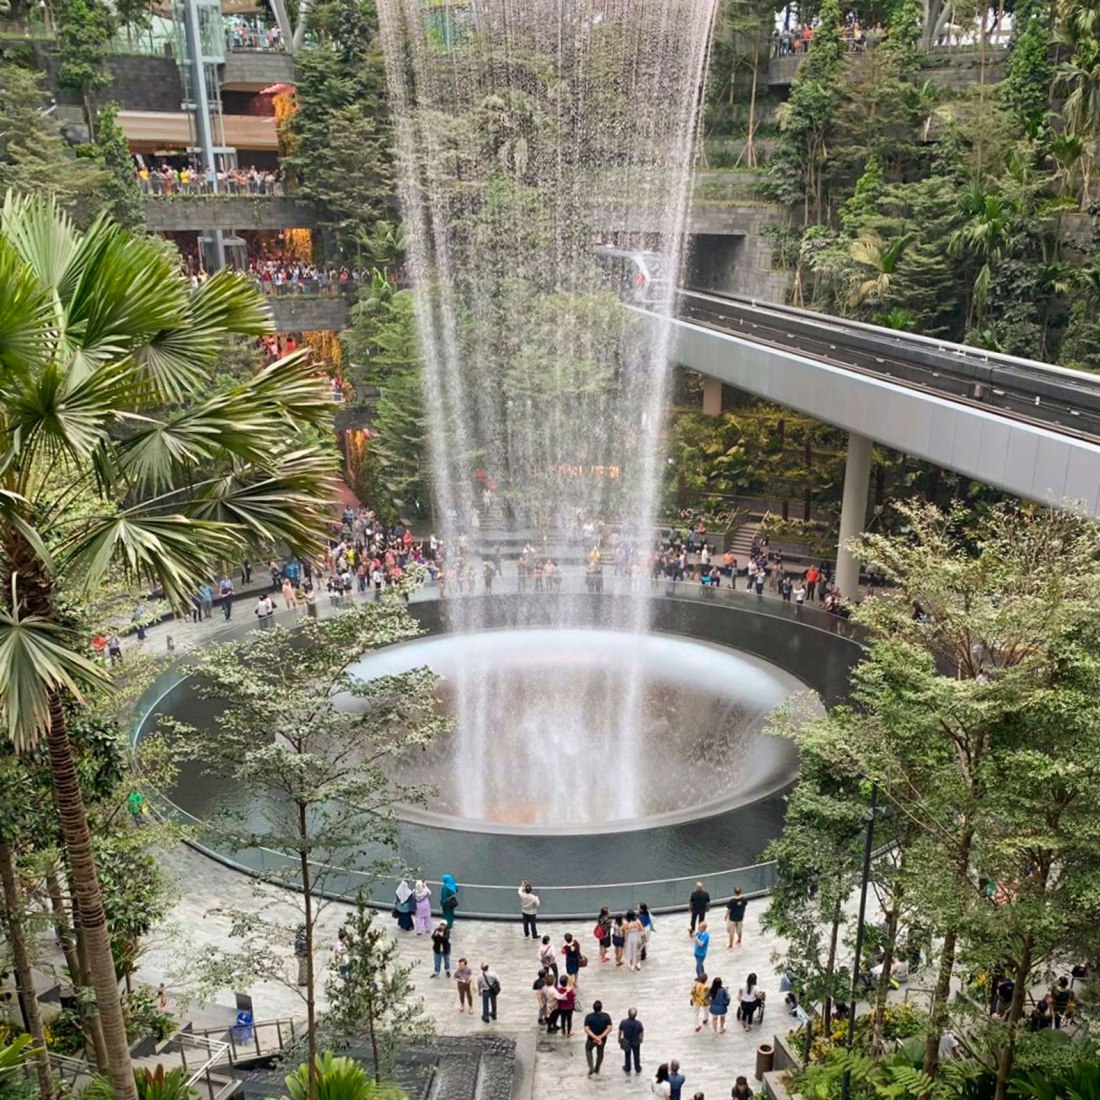 Singapore's Jewel Changi Airport gets the world's tallest indoor